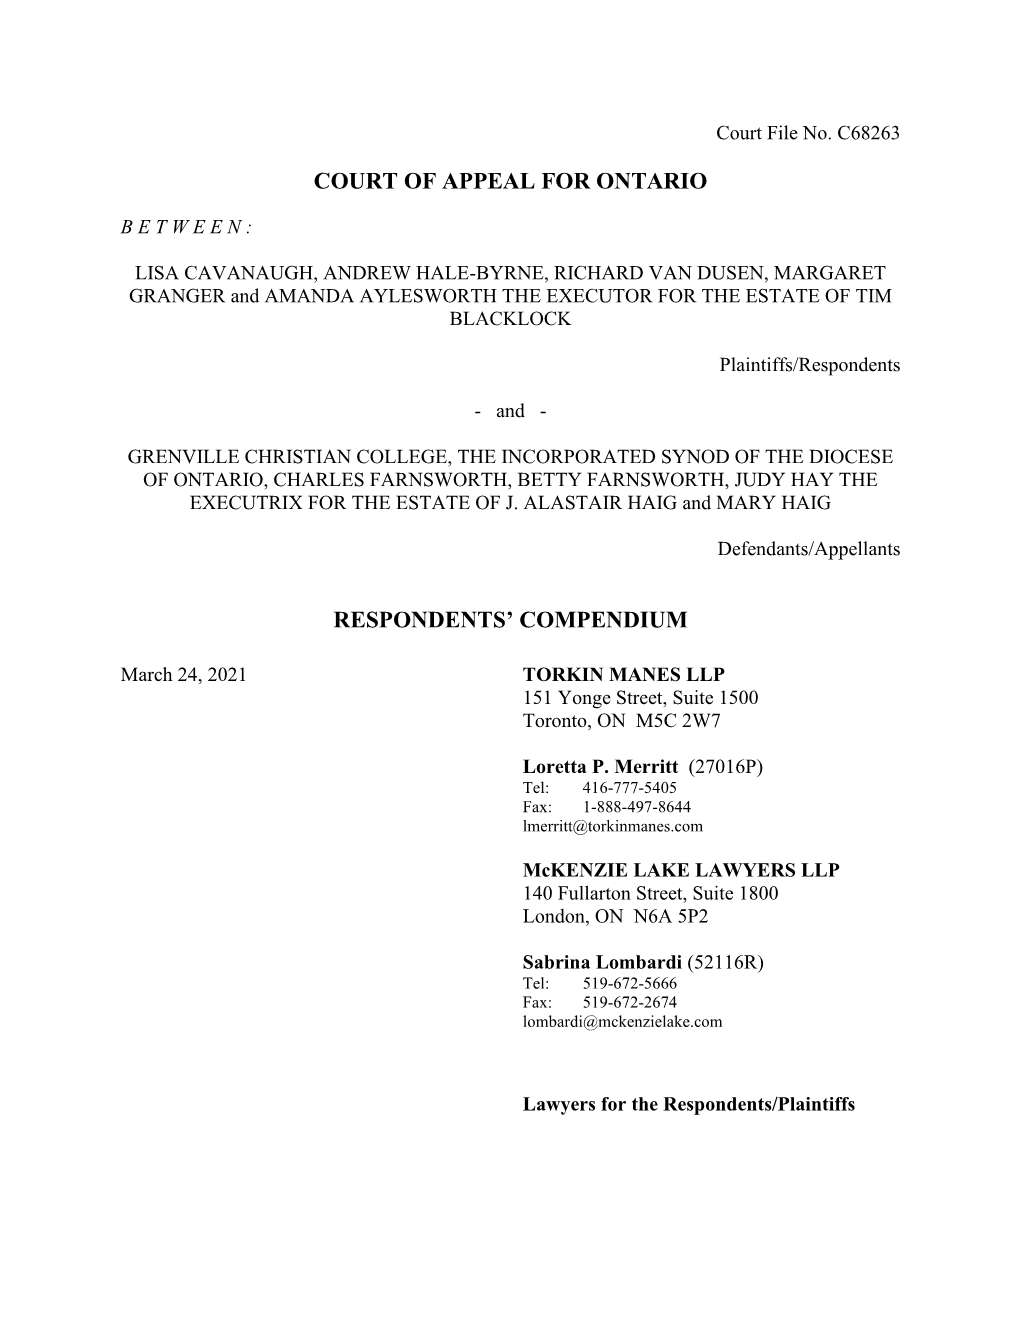 Court of Appeal for Ontario Respondents' Compendium